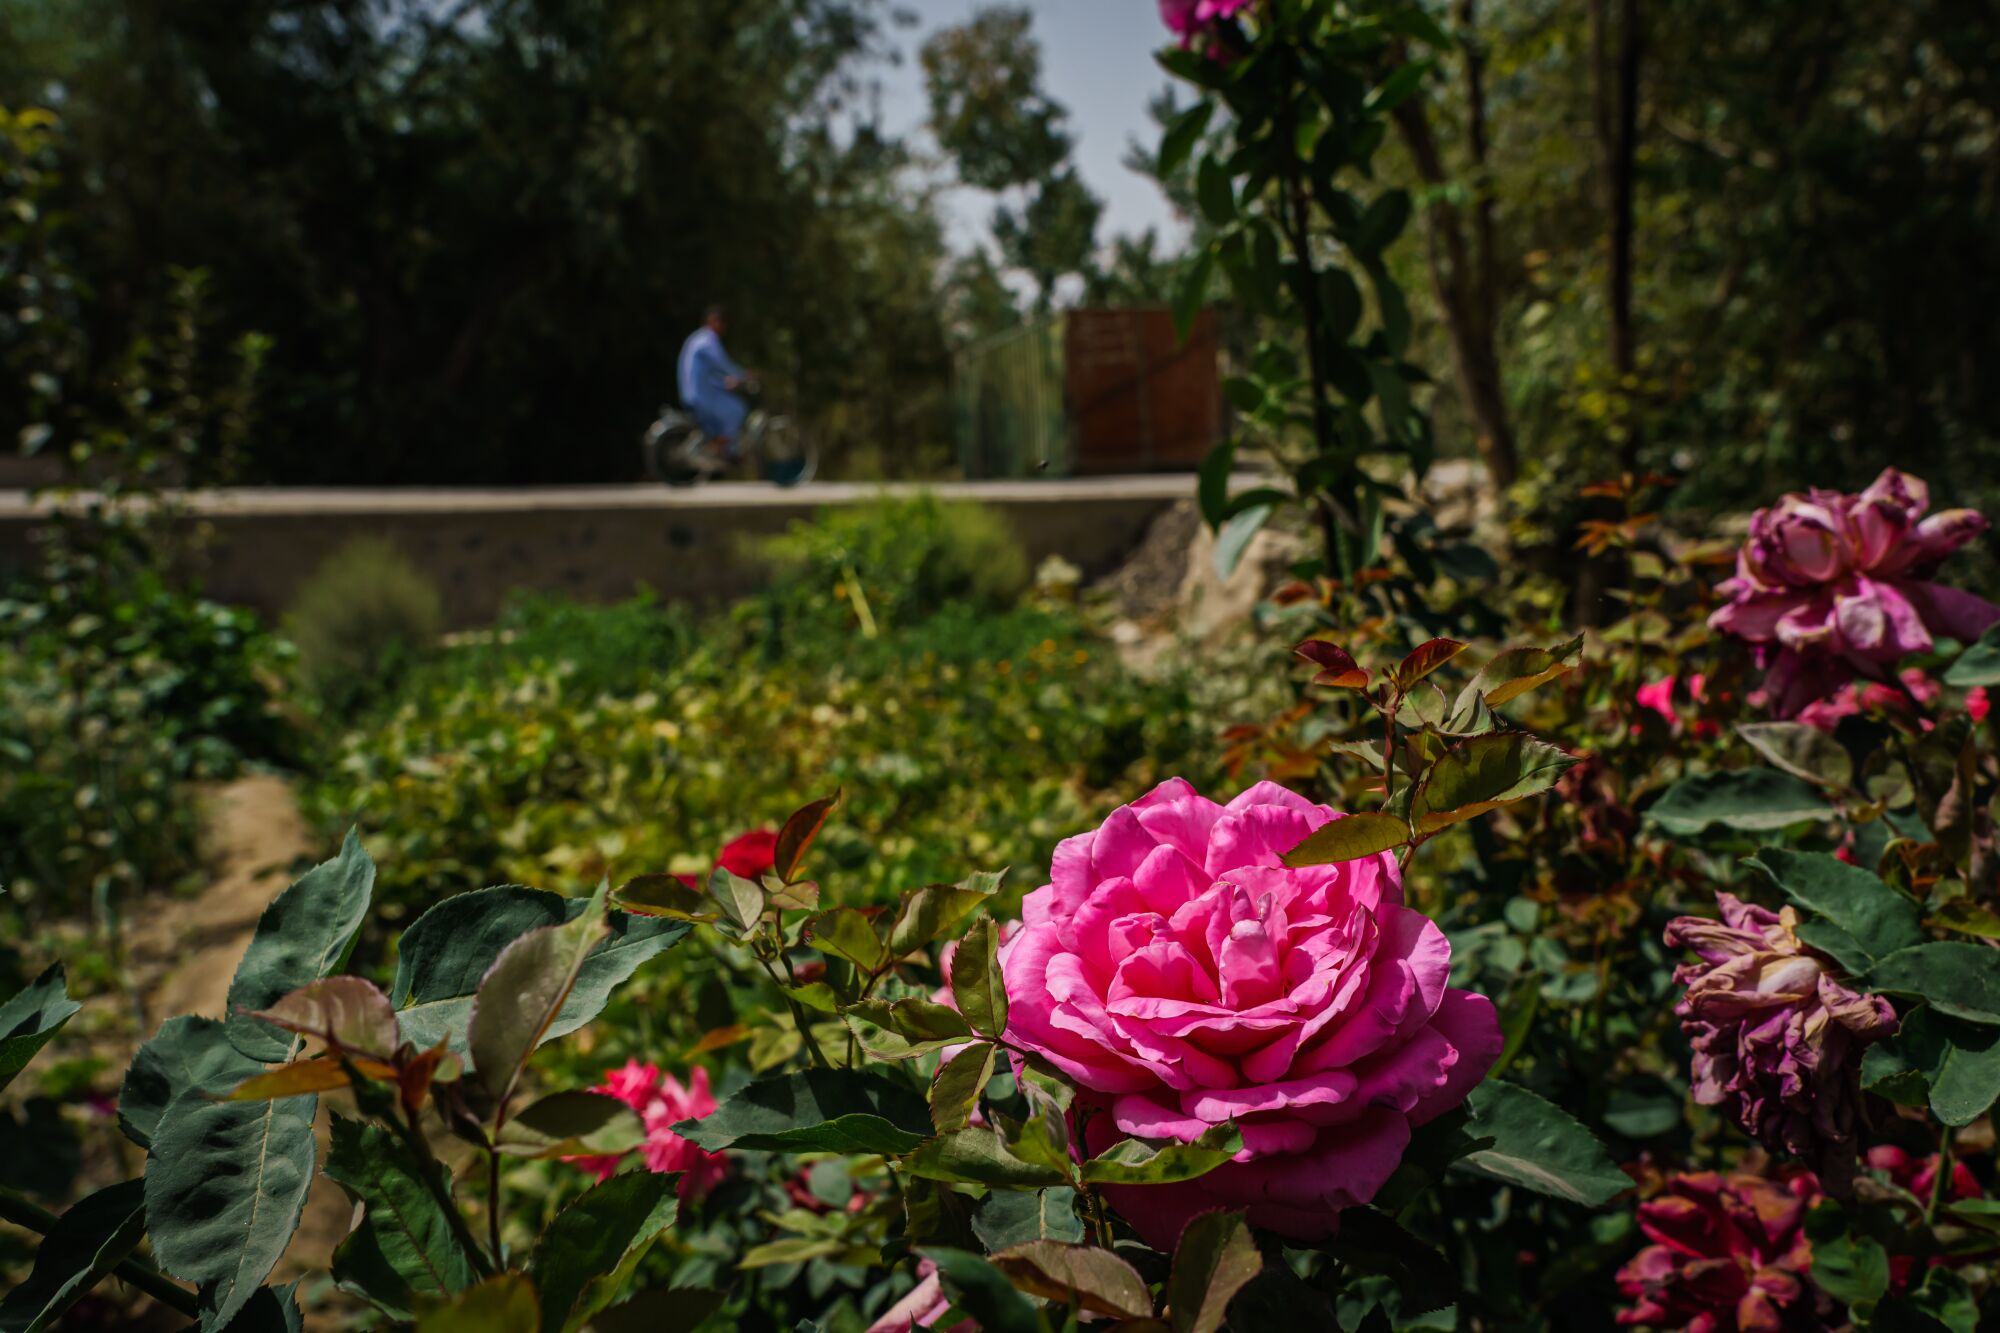 A close-up of pink flowers with a man on a bike in the distance.